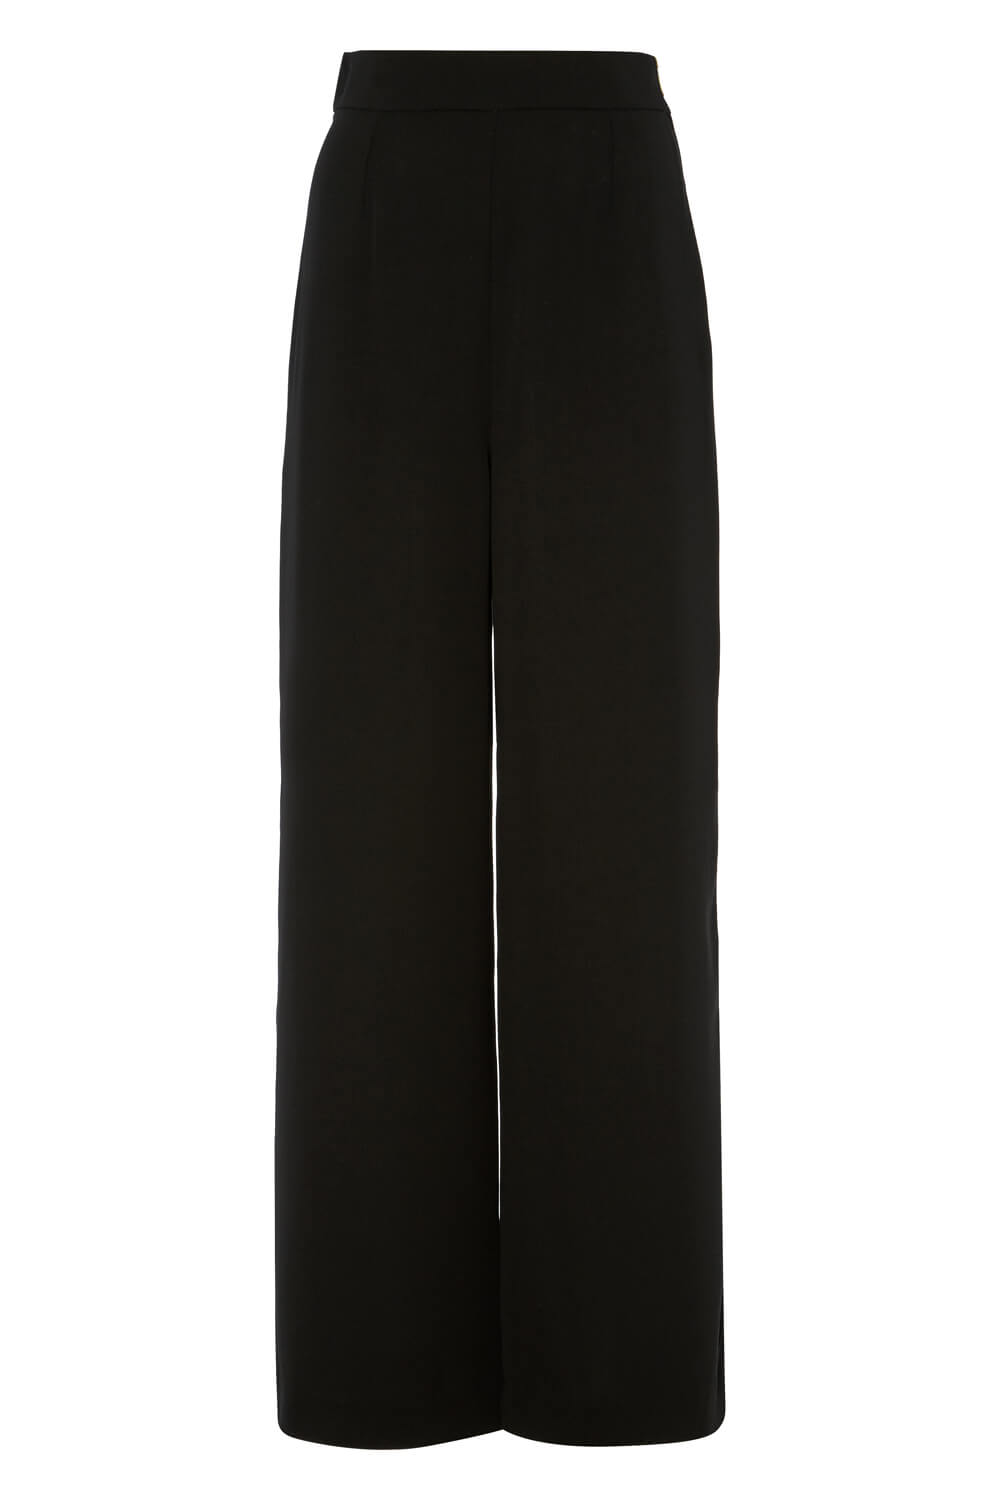 Black Wide Leg Trousers, Image 6 of 6